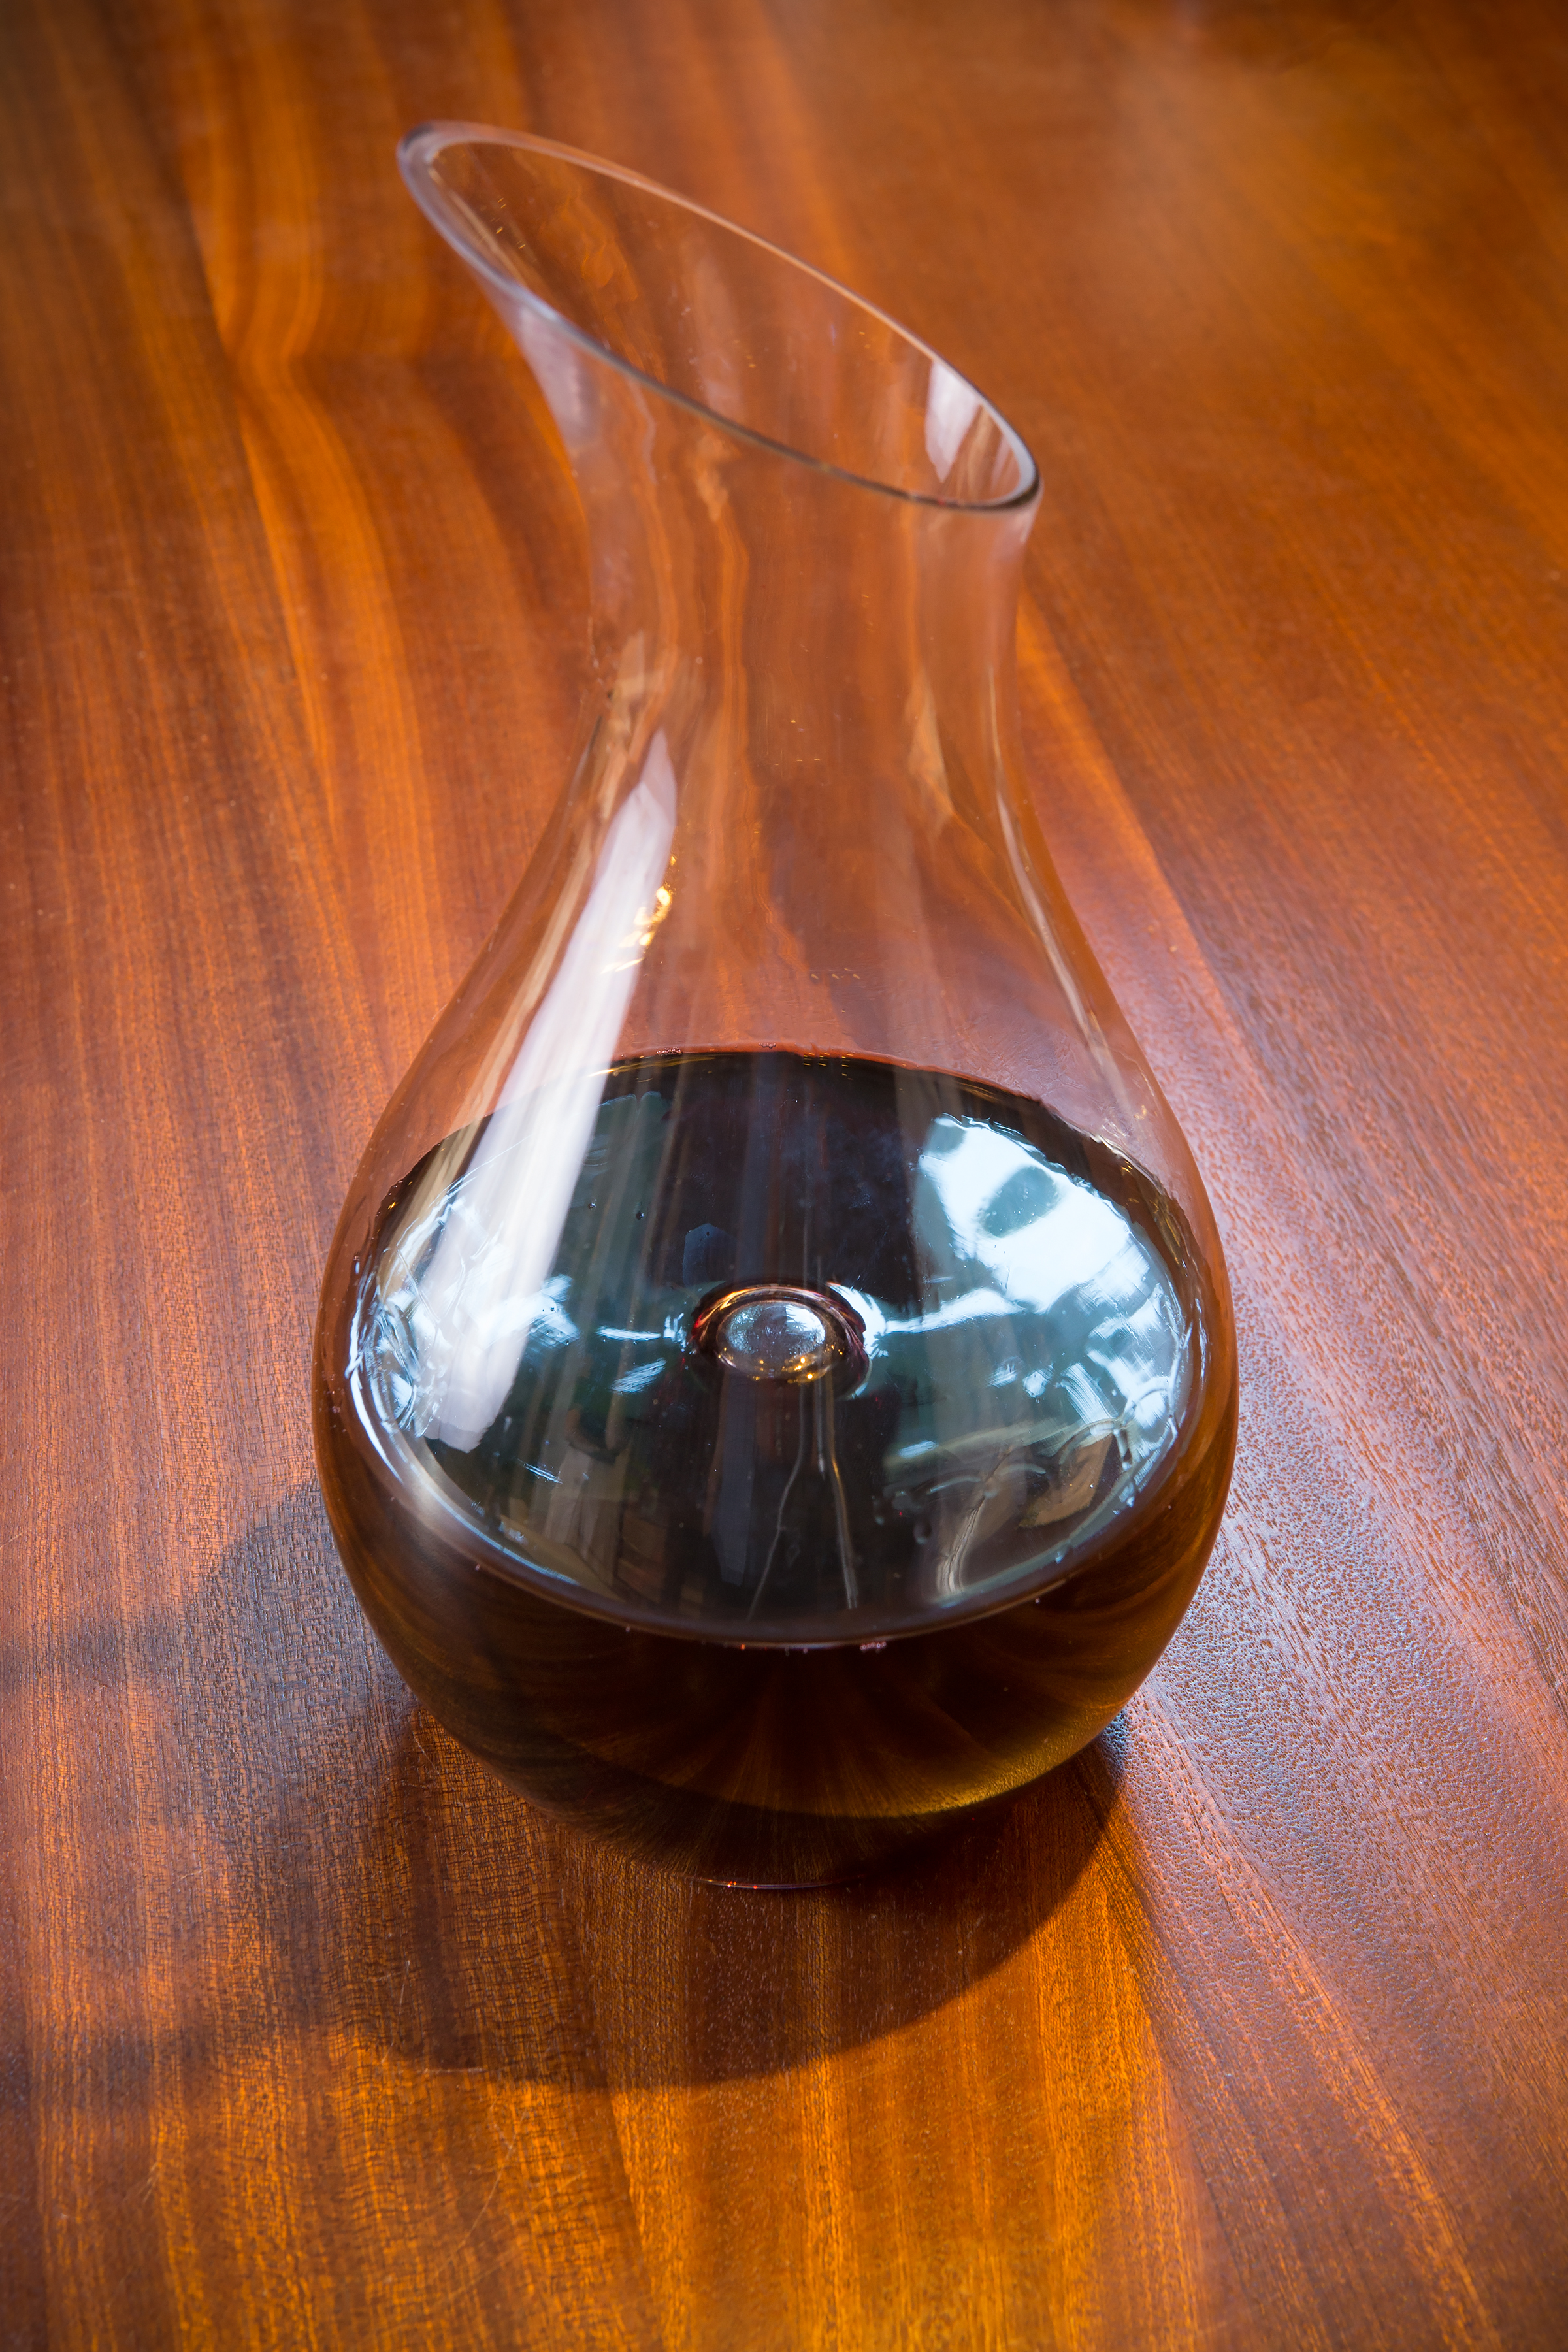 A decanter is used to aerate wine or to separate the wine from bottle sediment that can accumulate over years of storage — and it can also show the vibrant colors and light reflected through the wine. This decanter contains the wonderfully unique Cabernet Franc from Oregon’s premier Loire producer, Leah Jorgensen.